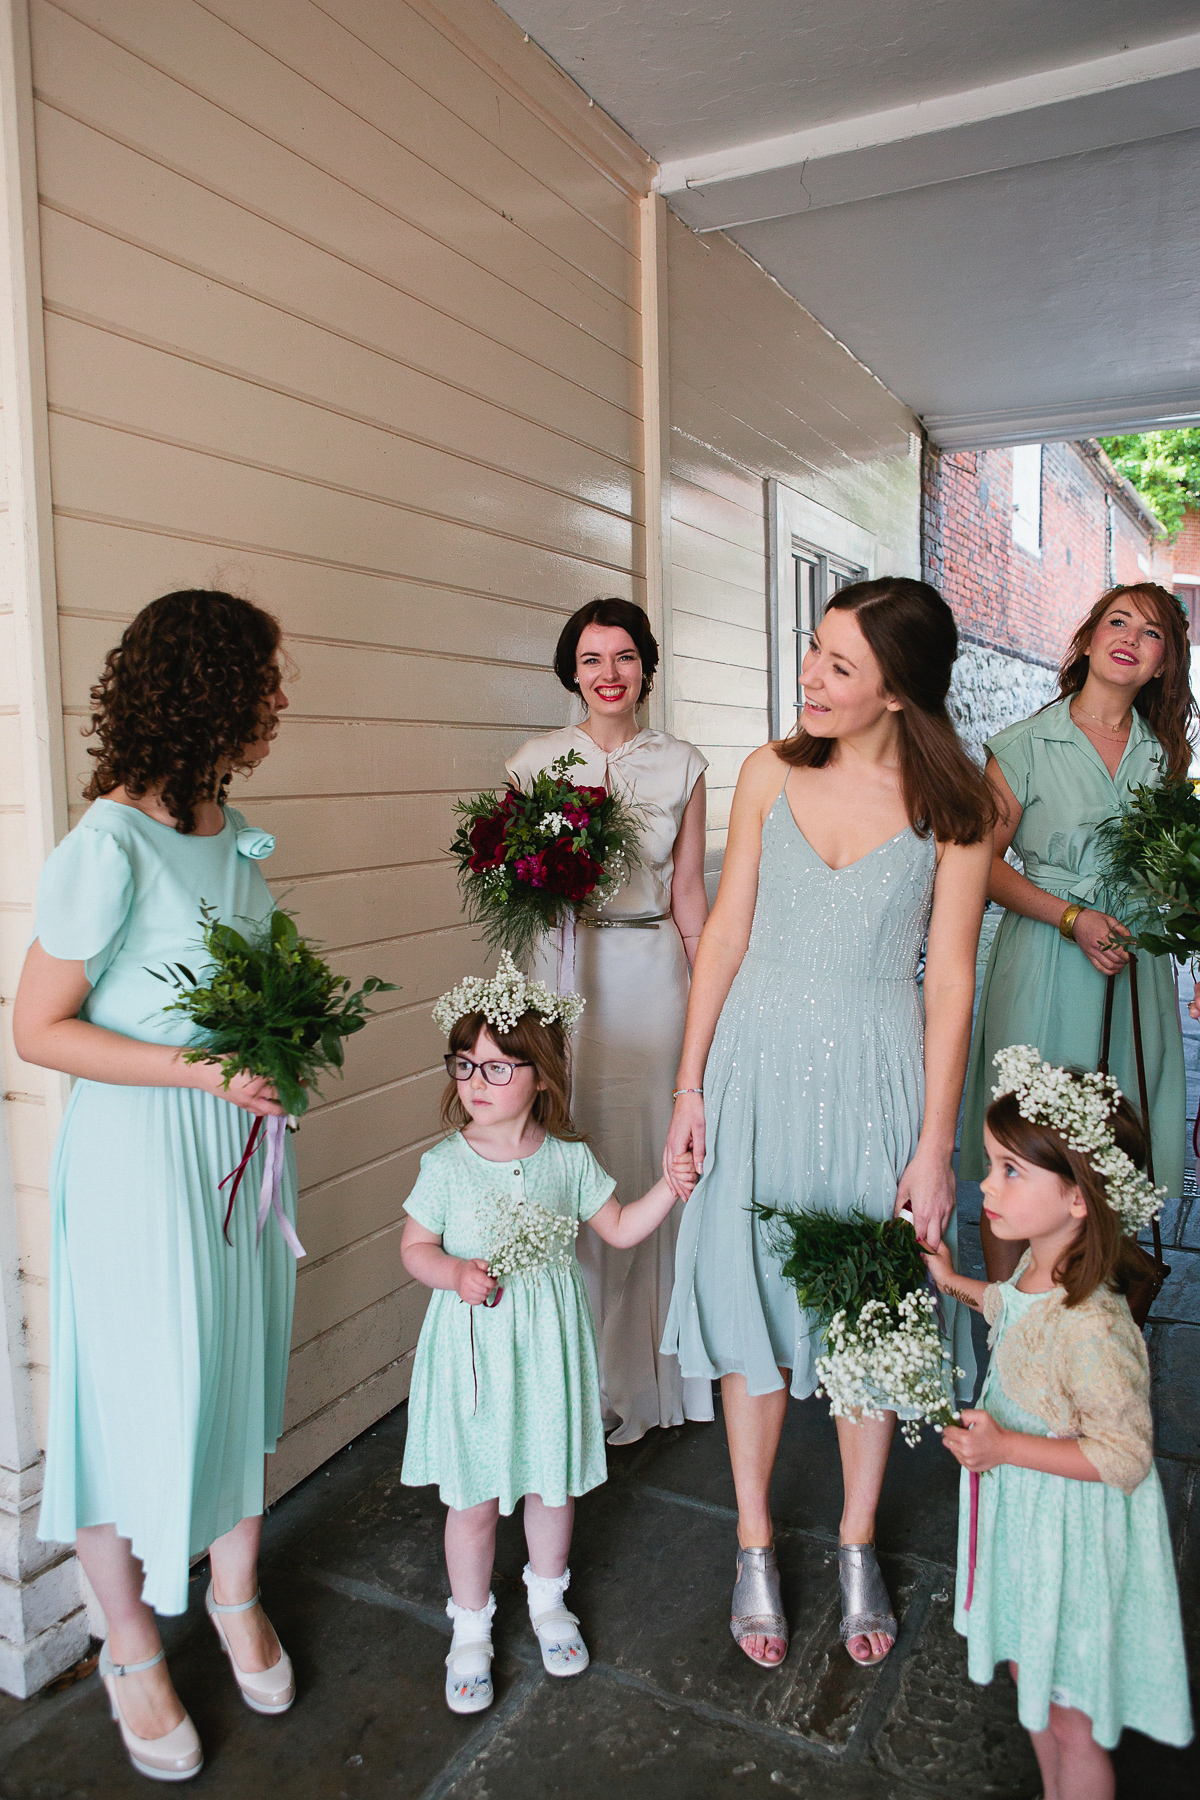 Sophie wore a Ghost dress for her elegant Spring wedding. Her bridesmaids wore mint green. Photography by Matilda Delves.